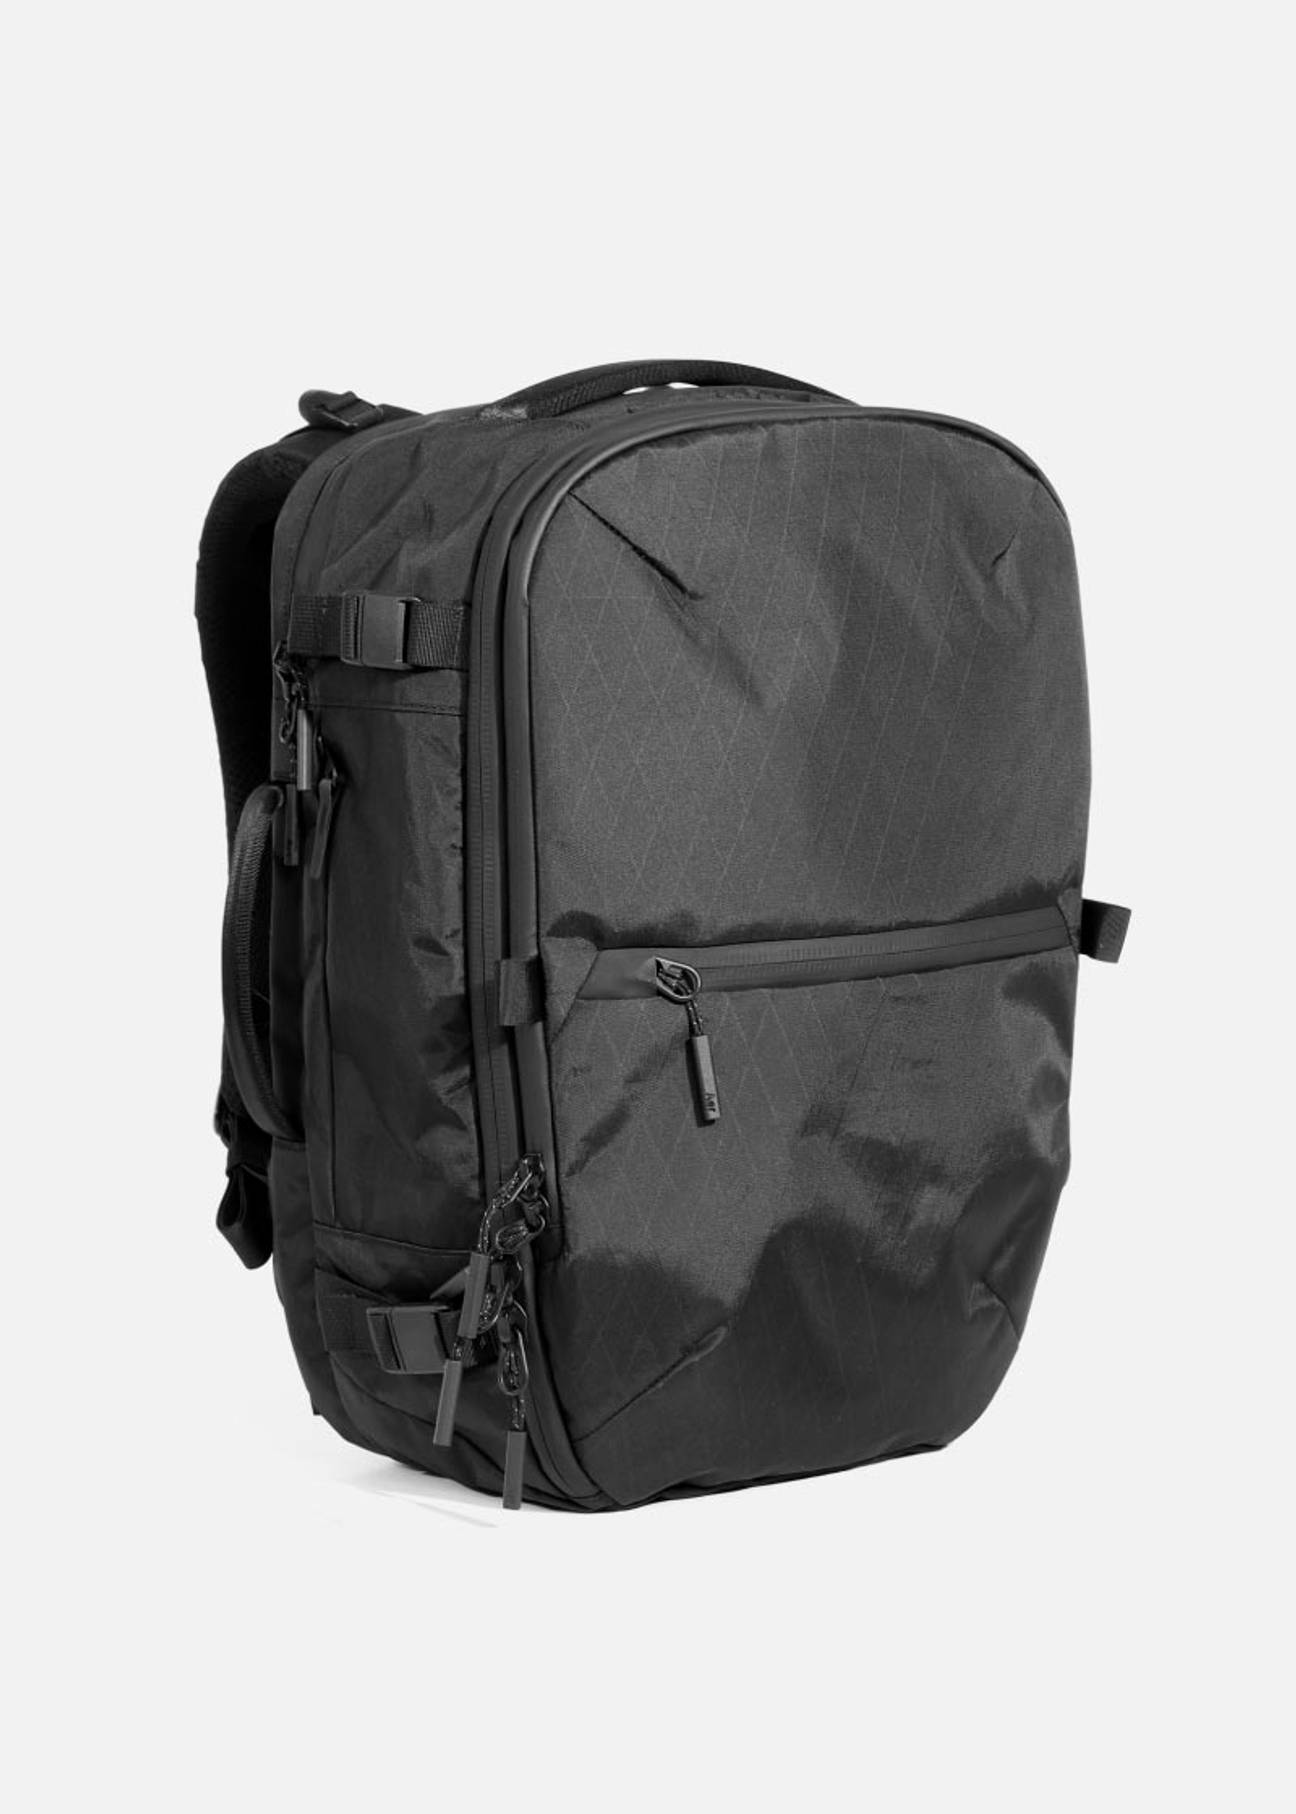 Aer | The best travel gear for wherever life takes you.